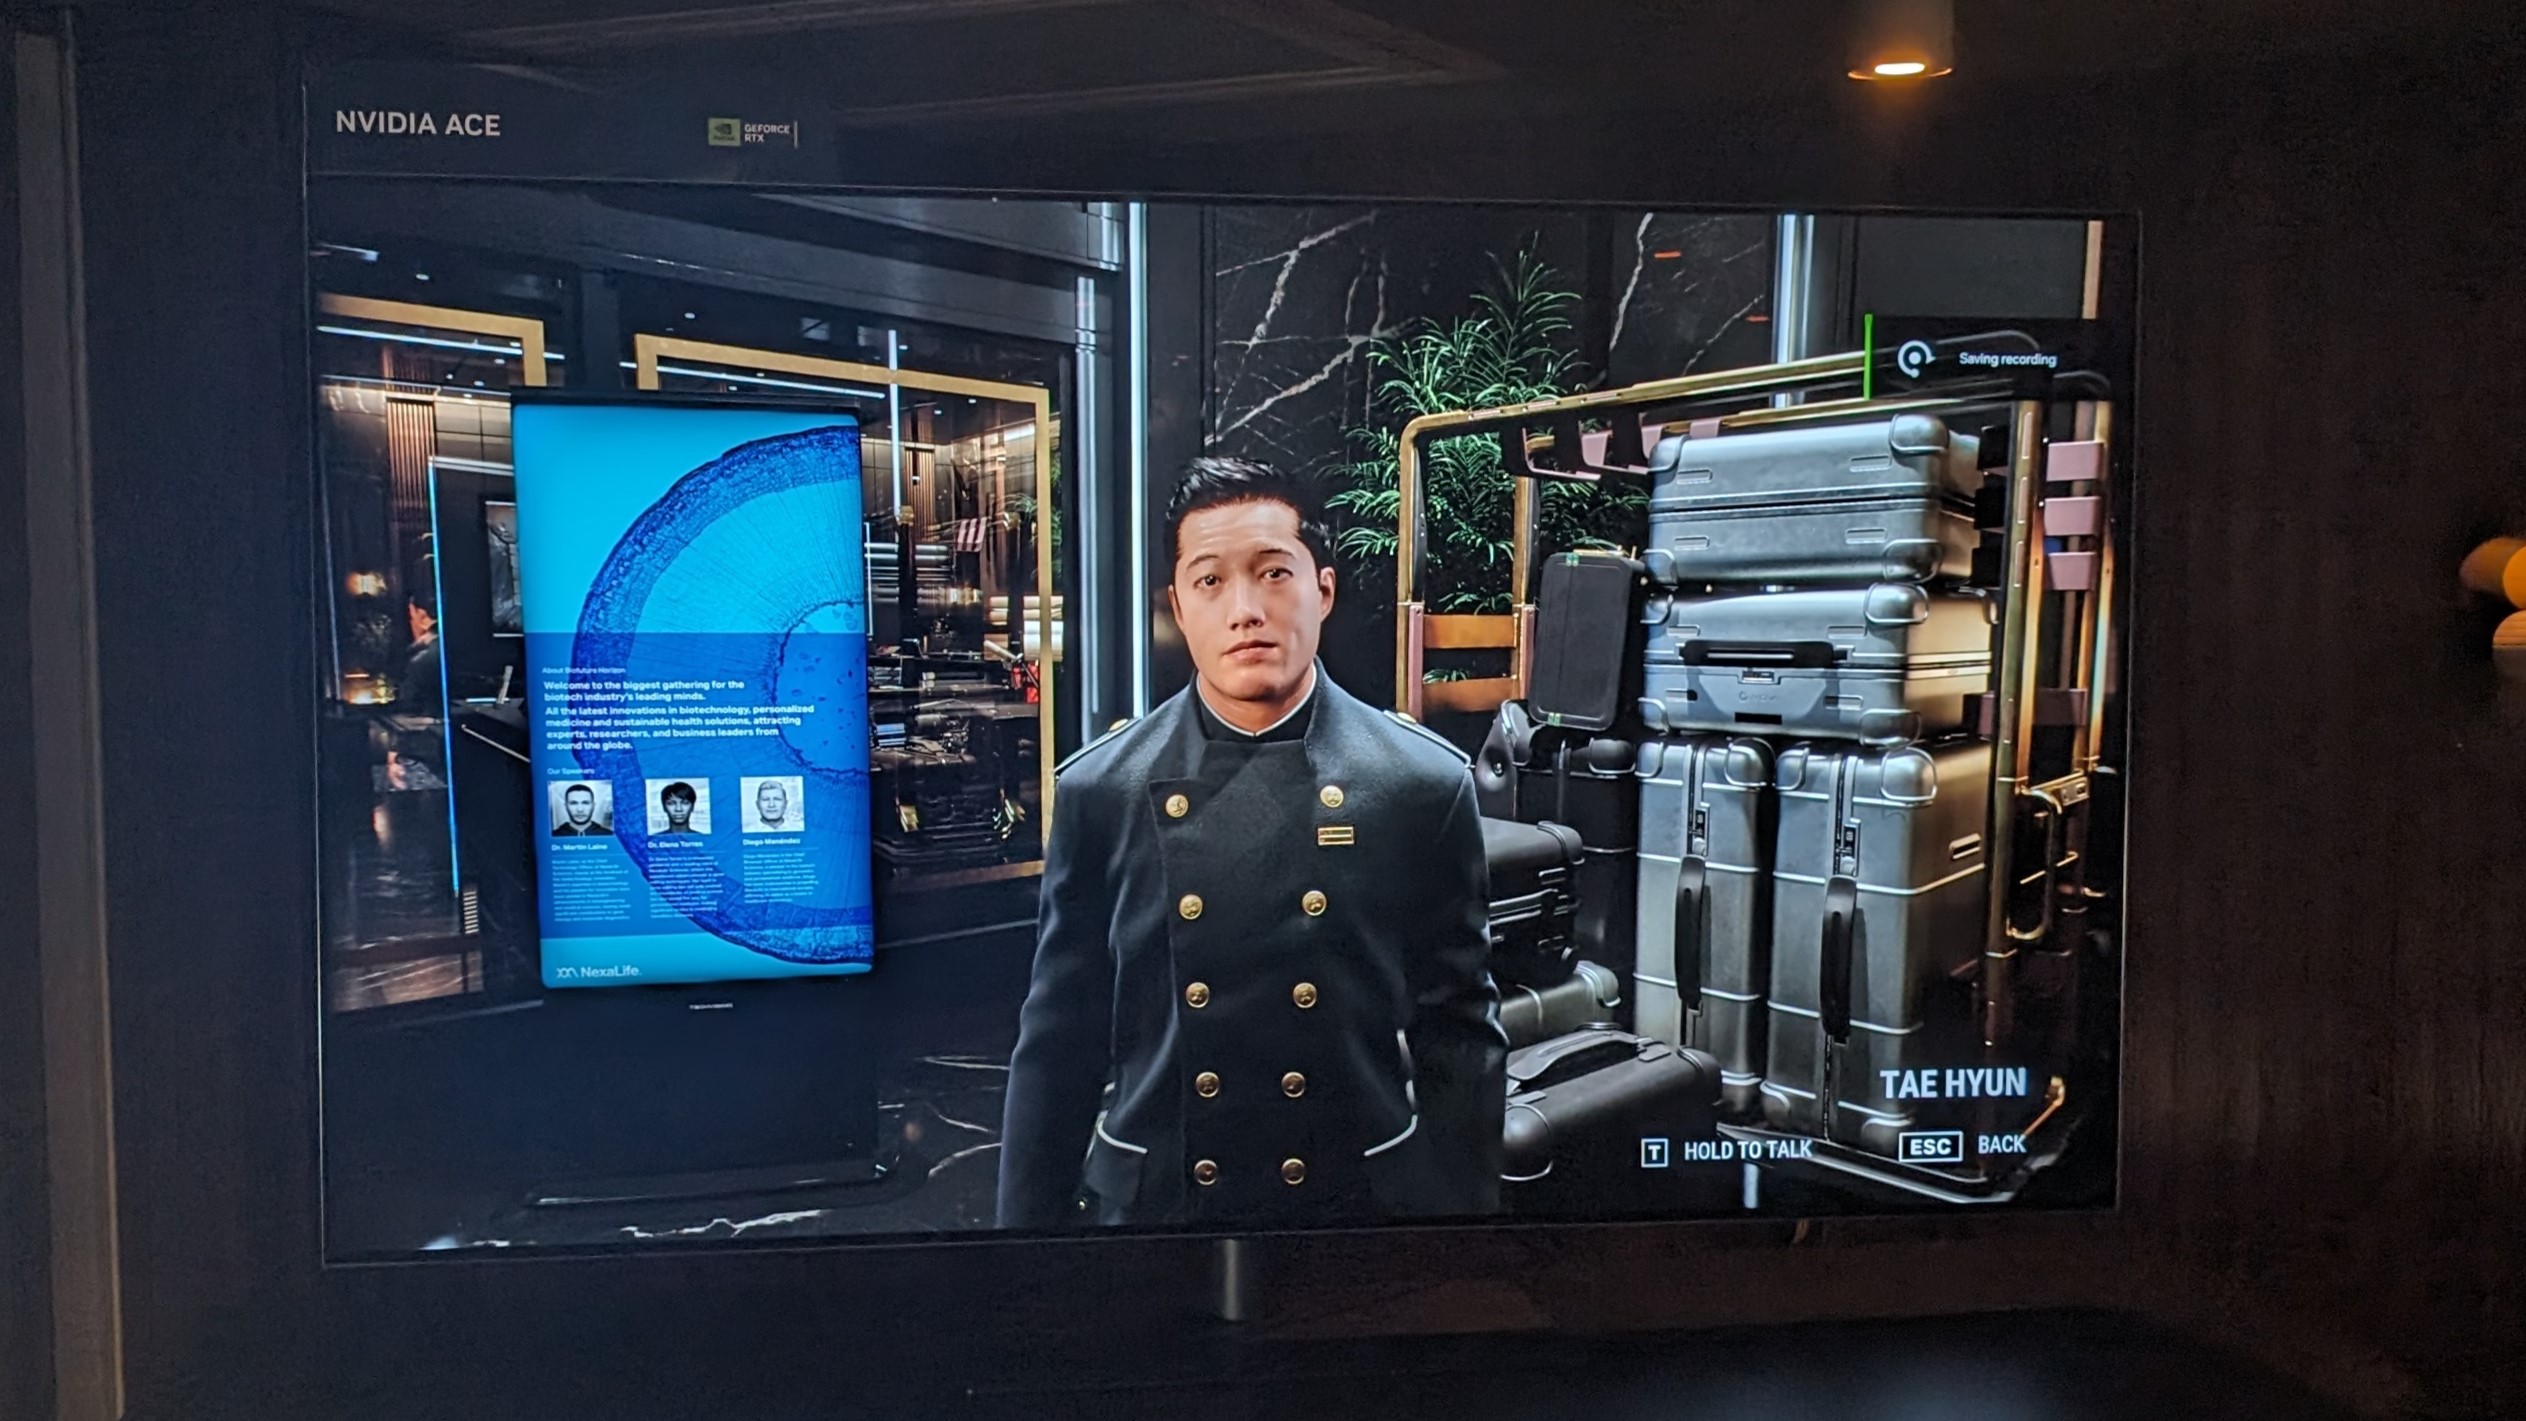 A photograph of a large TV displaying the Nvidia ACE 'Covert Protocol' demo.